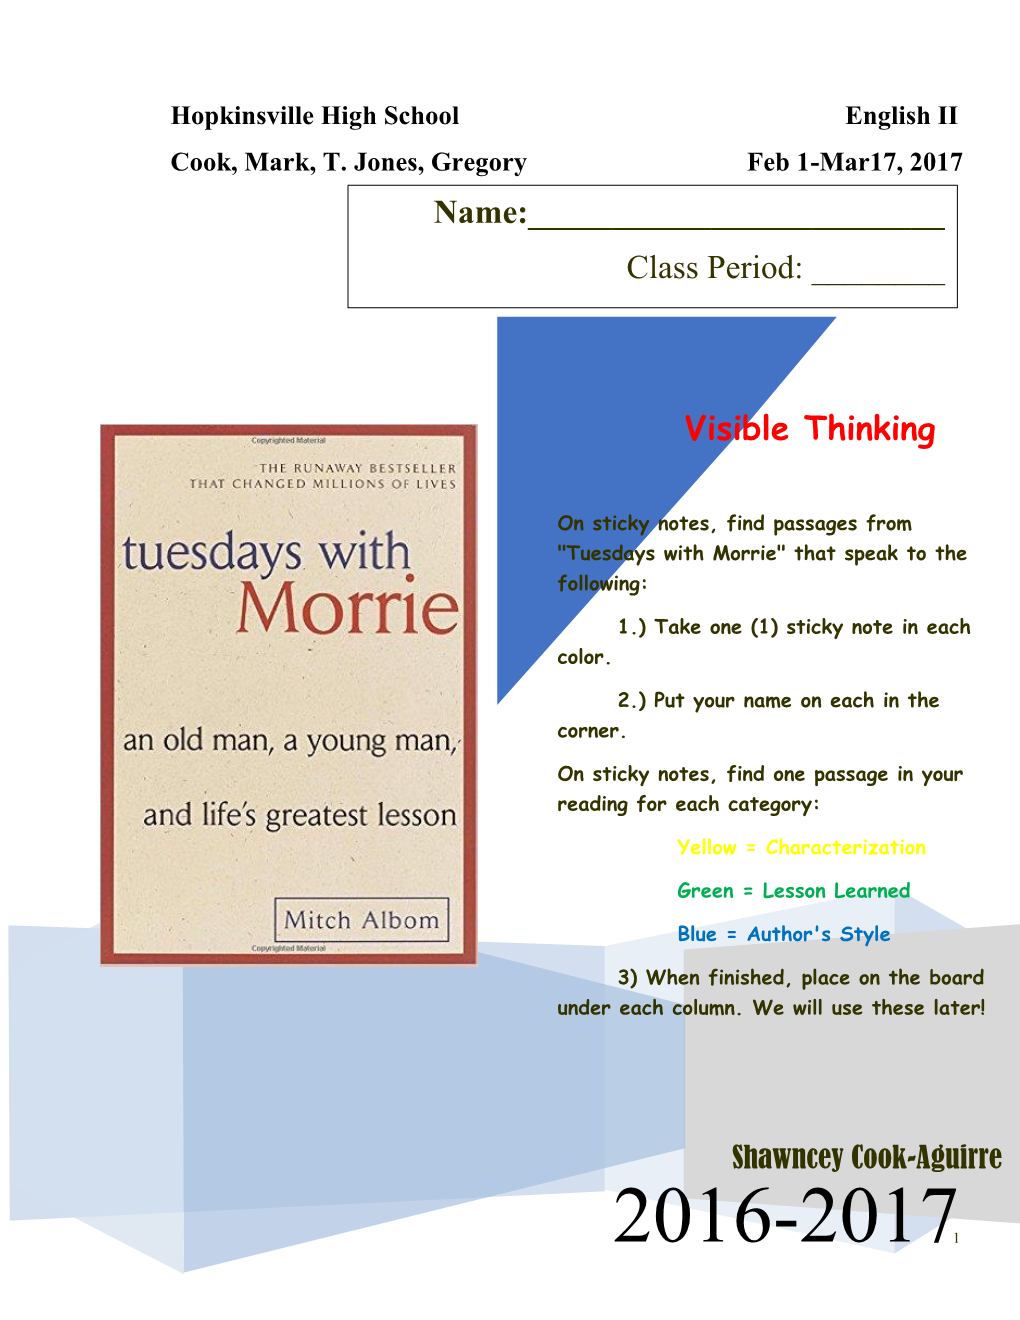 Tuesdays with Morrie" That Speak to the Following